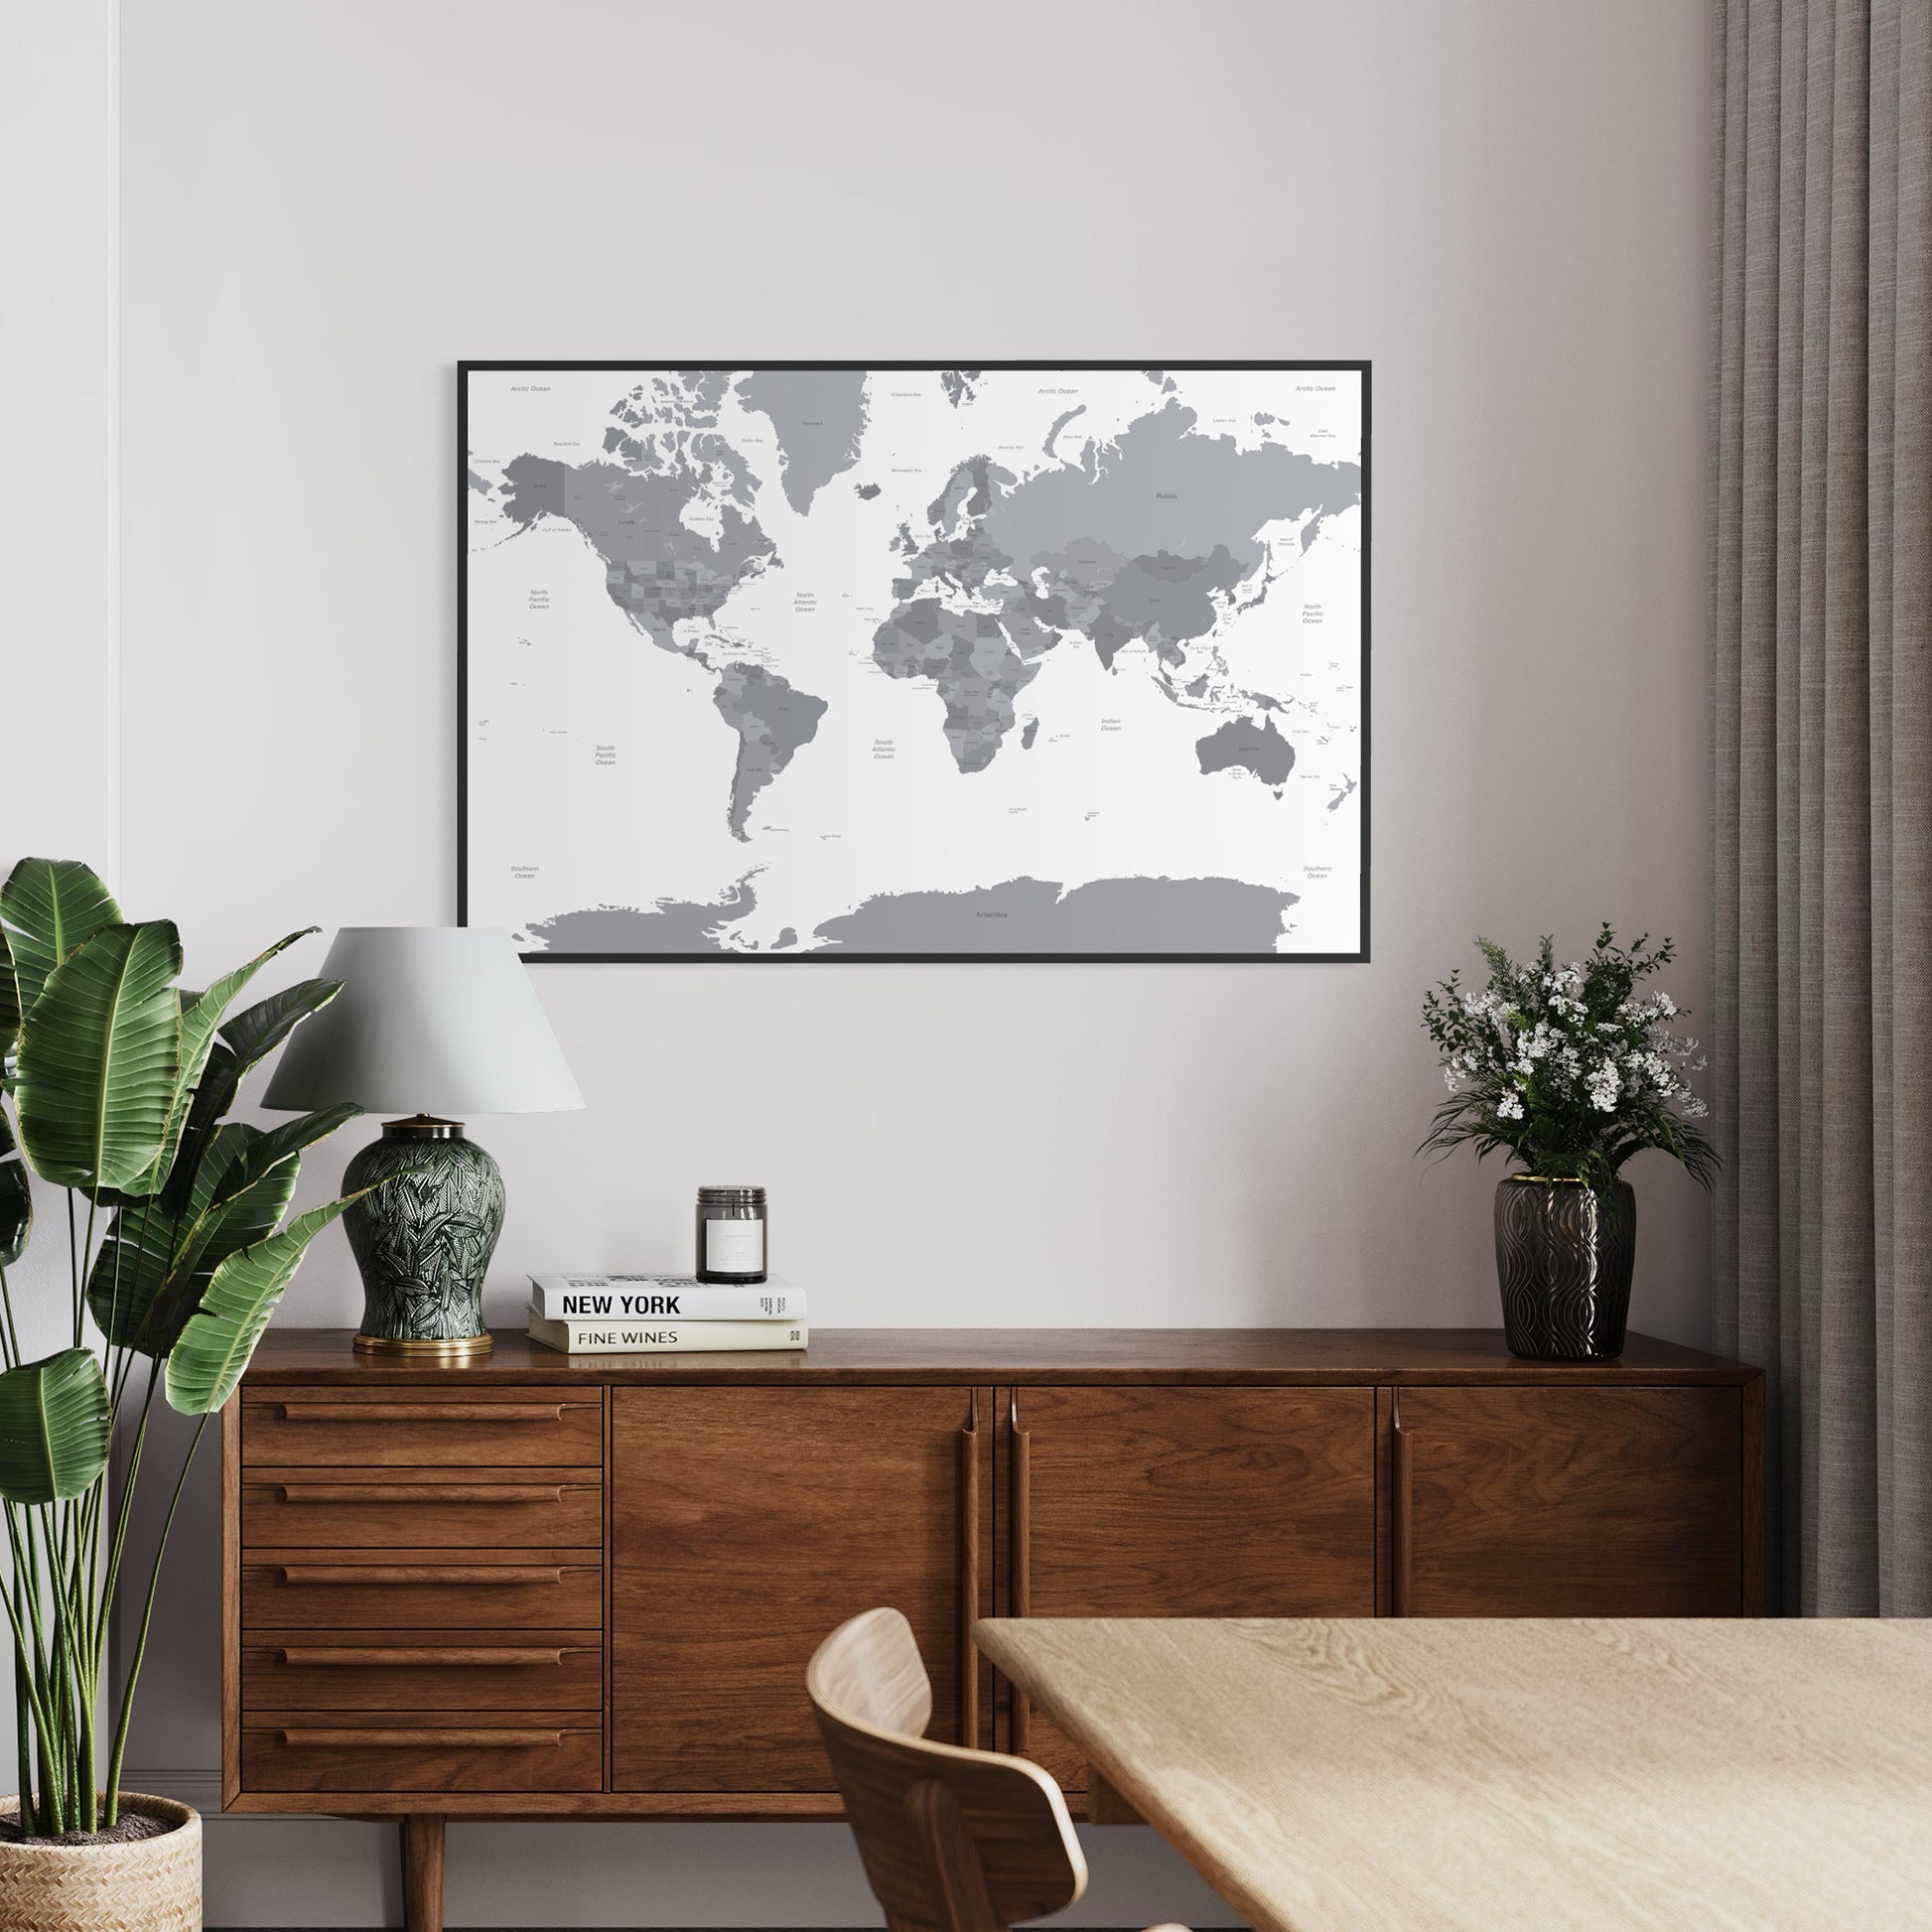 Grey Countries and White Sea Map of the World Above Sideboard